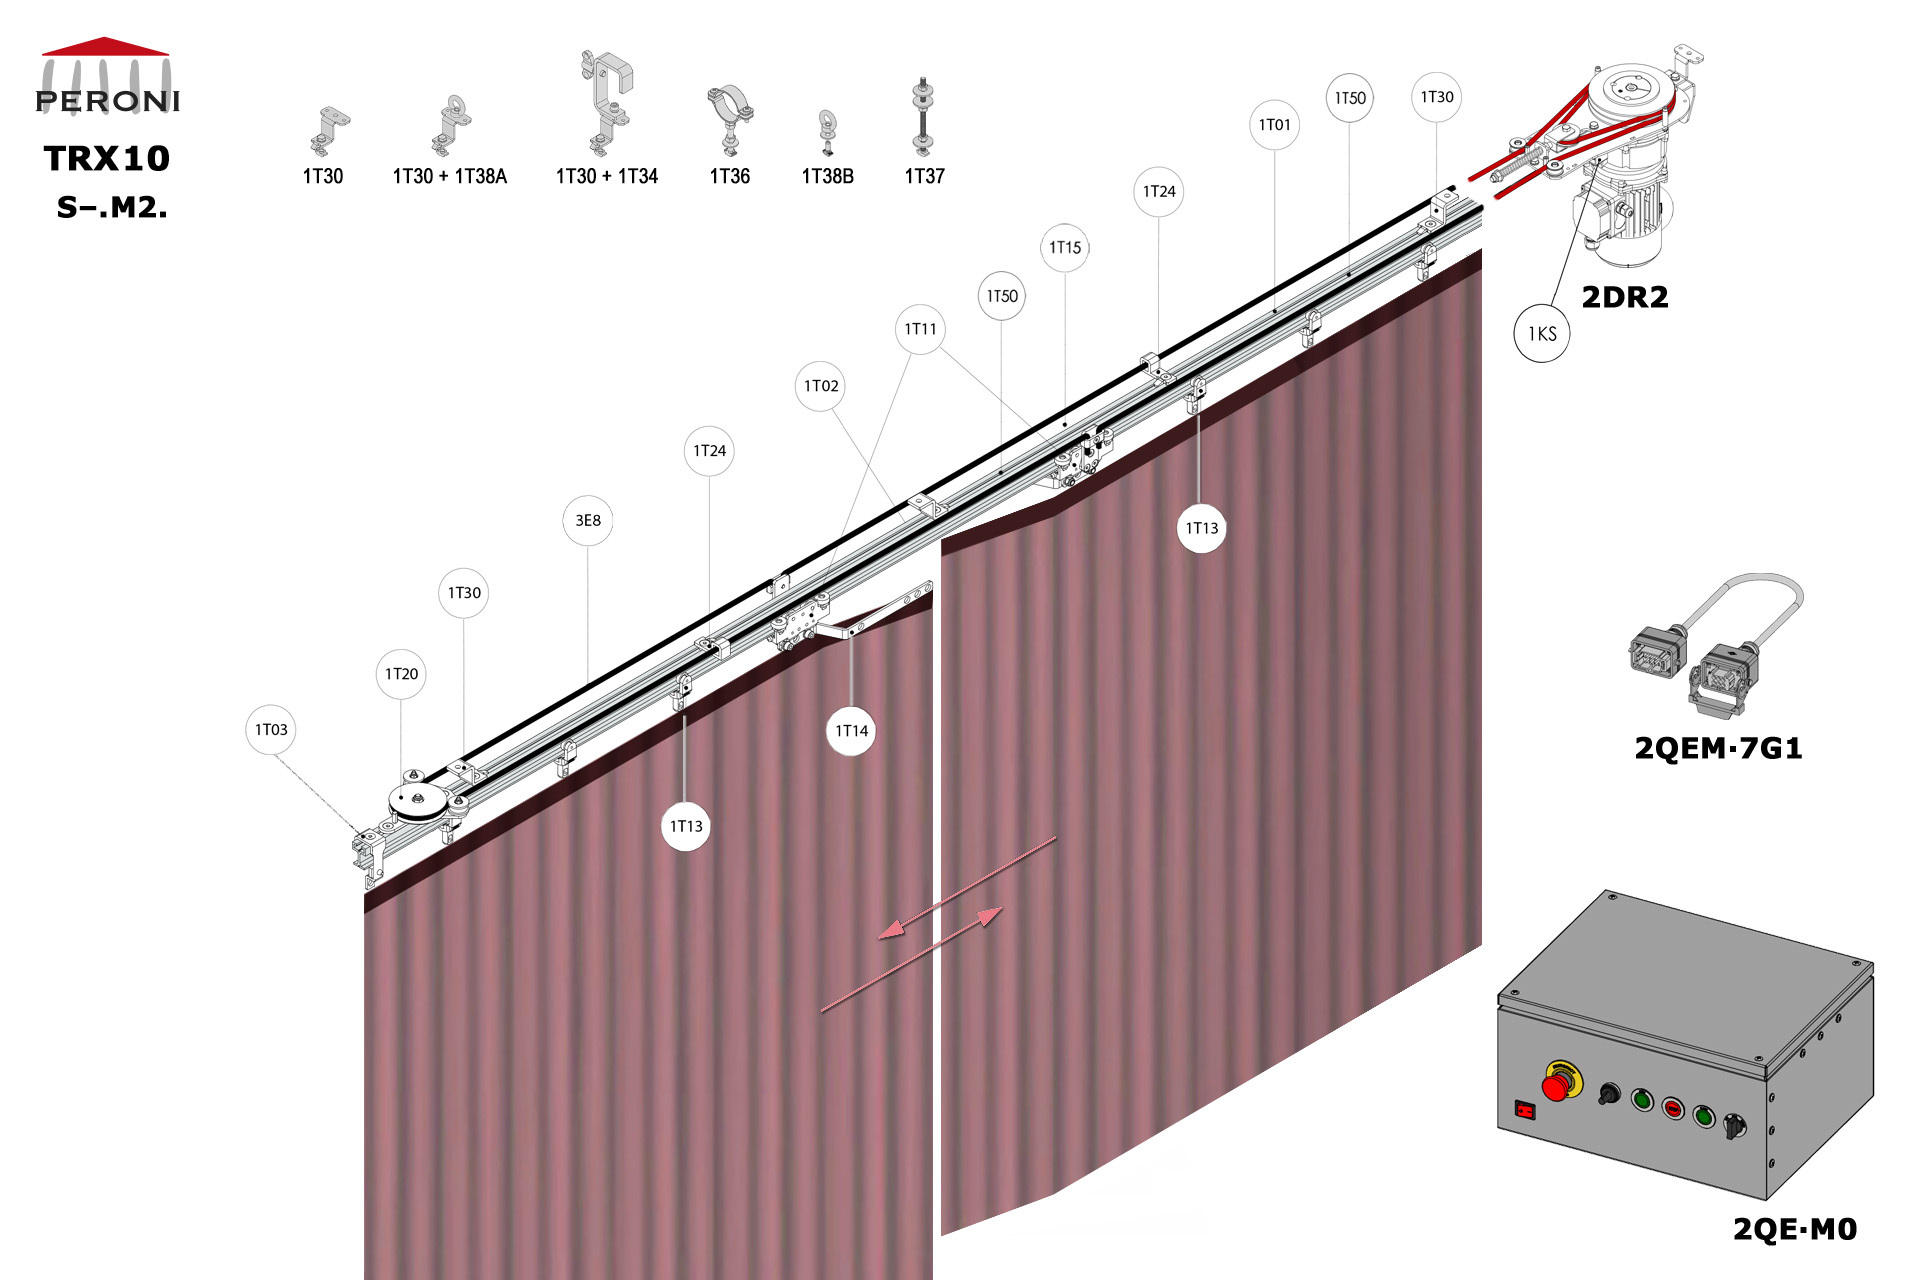 S-.M2. configuration track S-. Straight single rail central openingM2. Motorized, up to 125 kg curtainup to 50 cm central overlapComponents1T01 - Straight rail1T02 - Connection set1T03 - End stop1KS - End stop1T11 - Side cord master carrier1T13 - 2 Wheel runner1T14 - Overlap arms kitMotion control1T20 - Horizontal pulley1T24 - Side cord support1T15 - Limit switch arm for 1T11 + 1T501T50 - Limit switch for 1T11 + 1T152DR2-RDS2QEM-7G1-152QEW - Panou de comanda W 3E - Franghie Poly Ø 8 mm